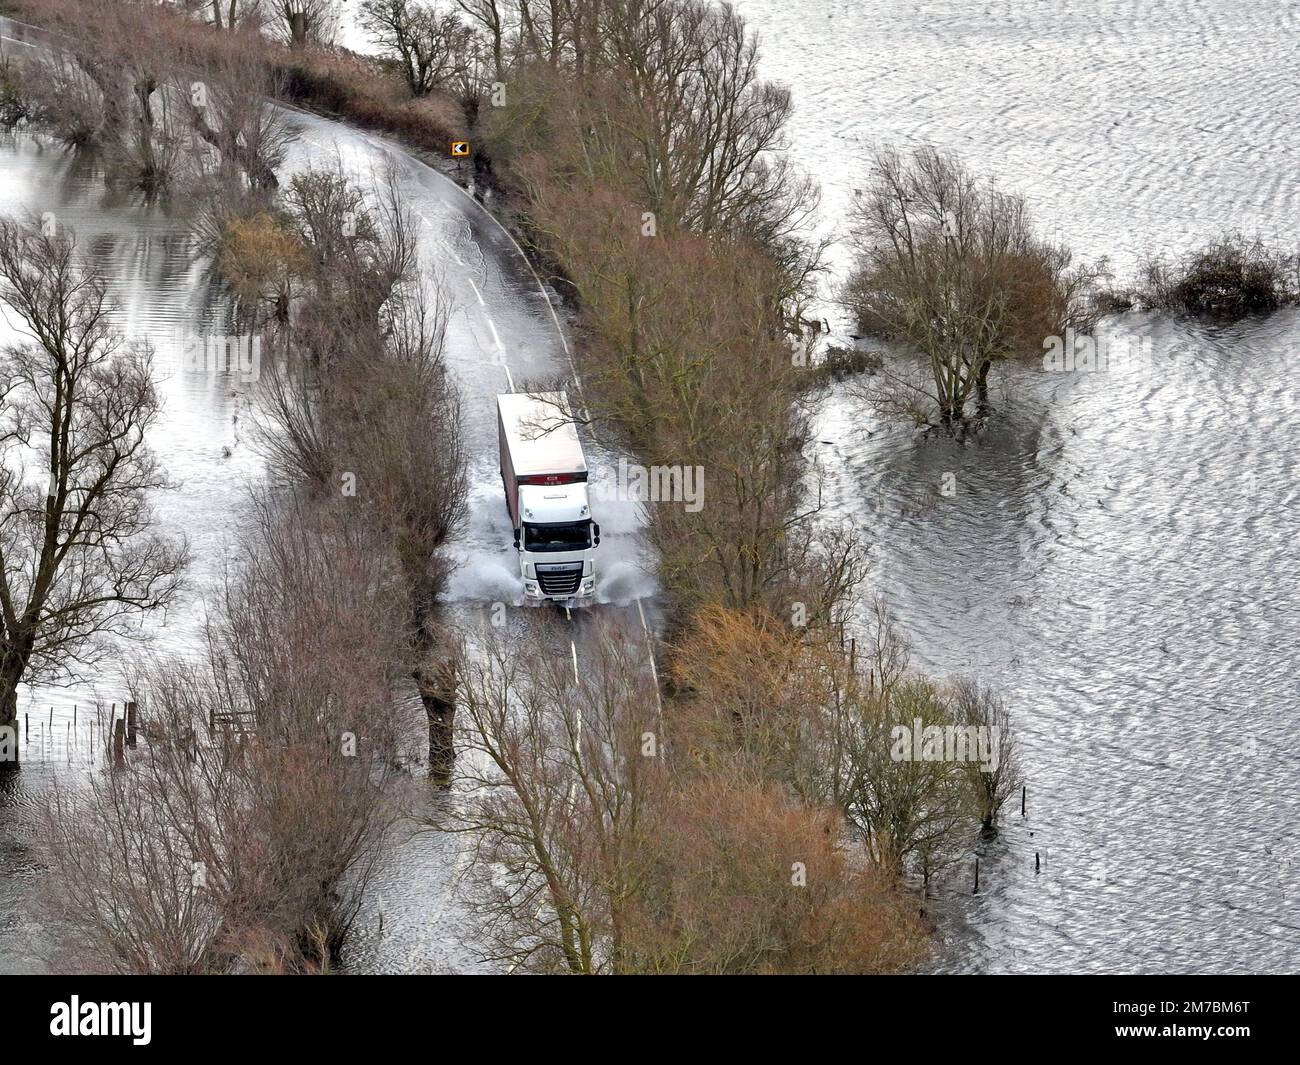 The Welney wash fills with floodwater and the road is becoming flooded as the levels of The Old Bedford river and River Delph rise after recent rain, in Welney, Cambridgeshire, on January 5, 2023. Stock Photo